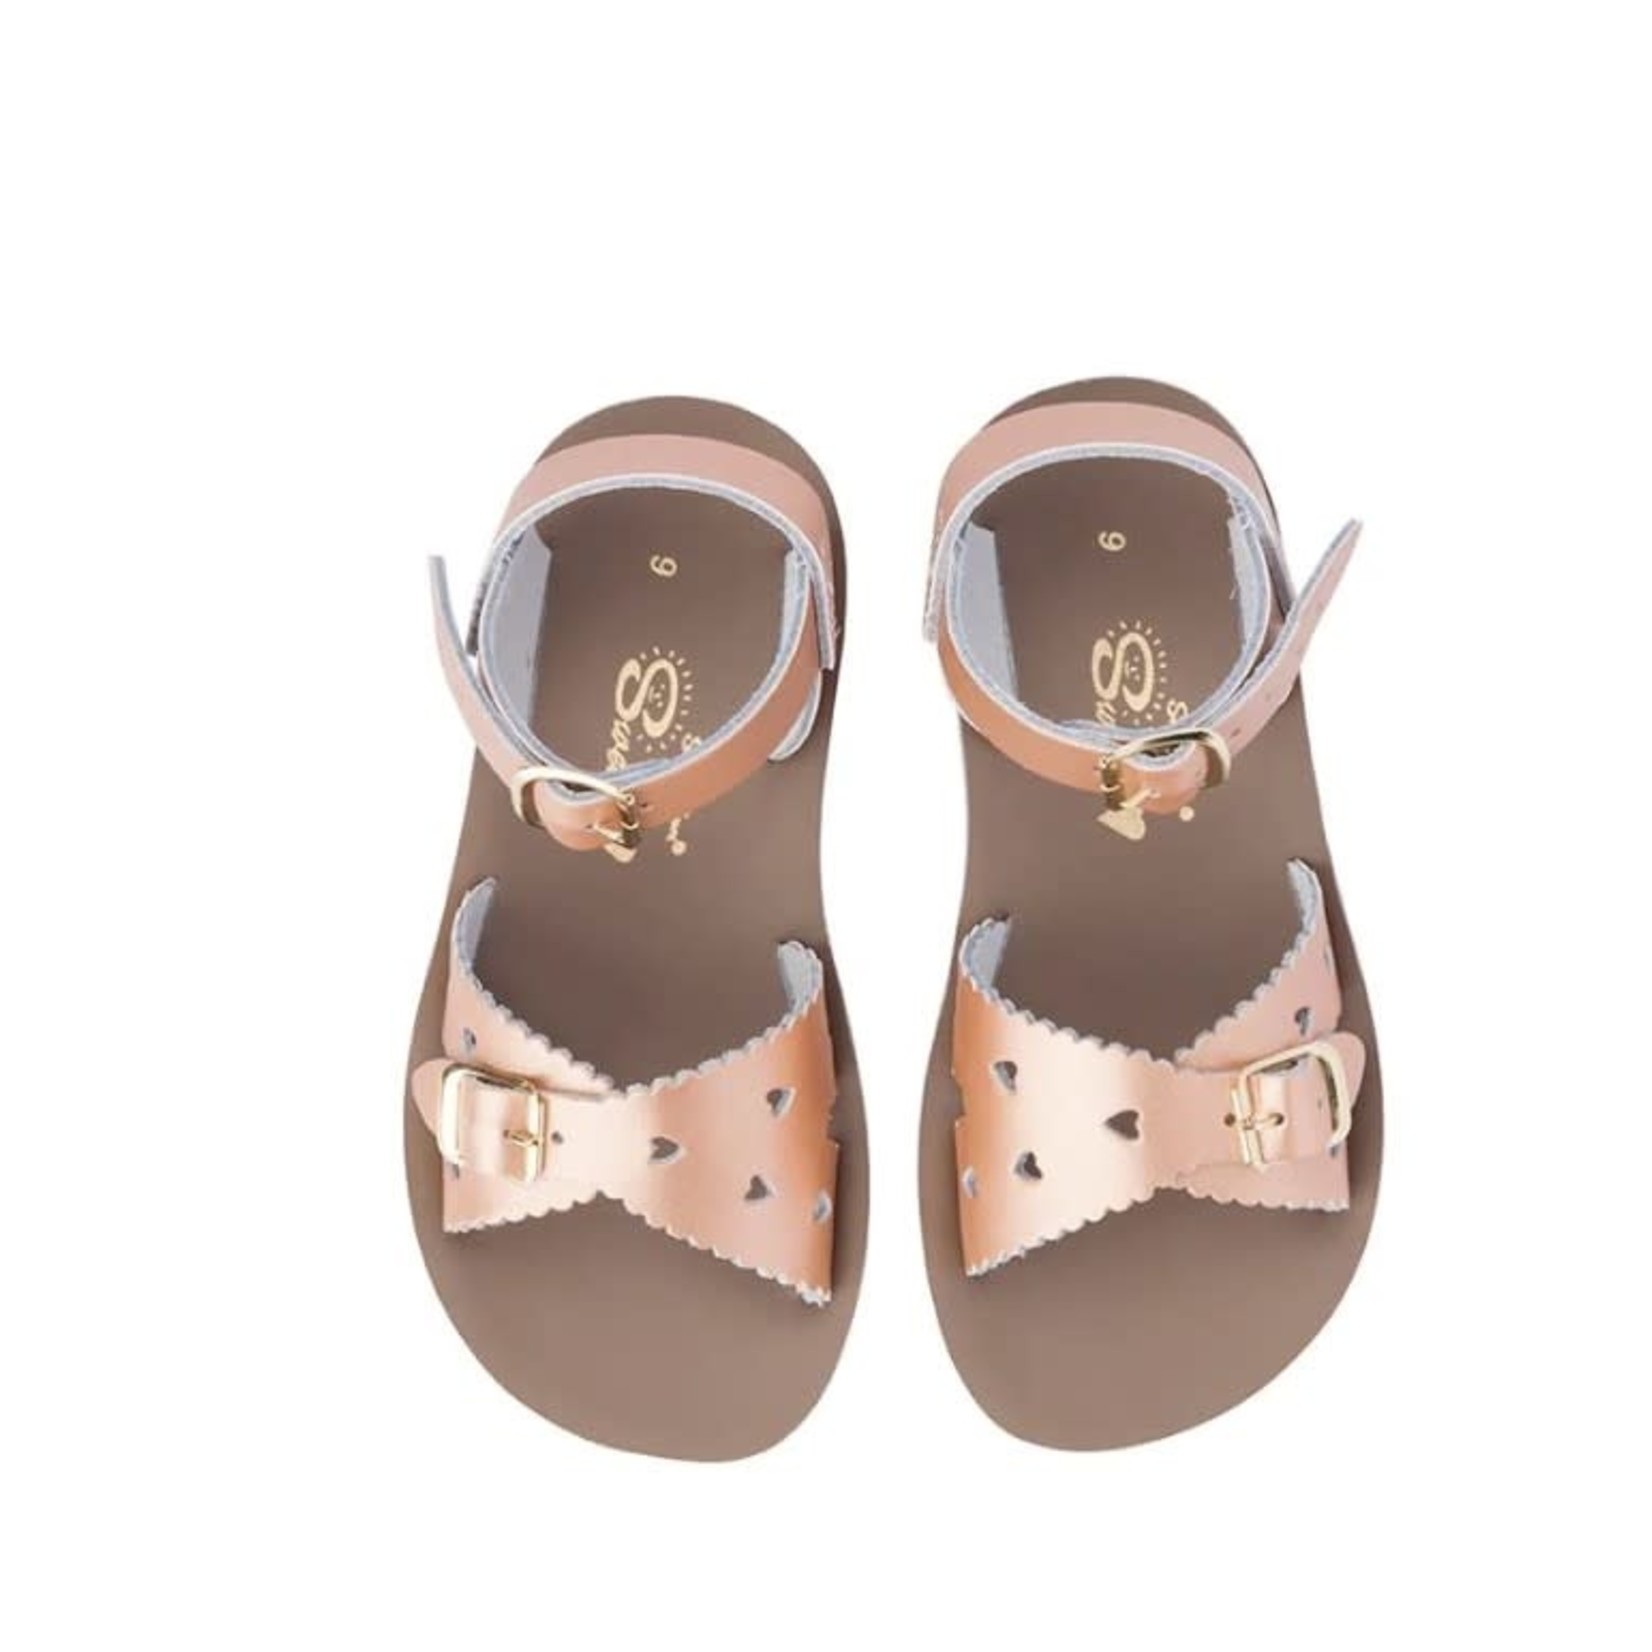 Saltwater Sandals SALTWATER SANDALS - Sandales de cuir à orteils ouverts 'Sweetheart - Rose Gold'